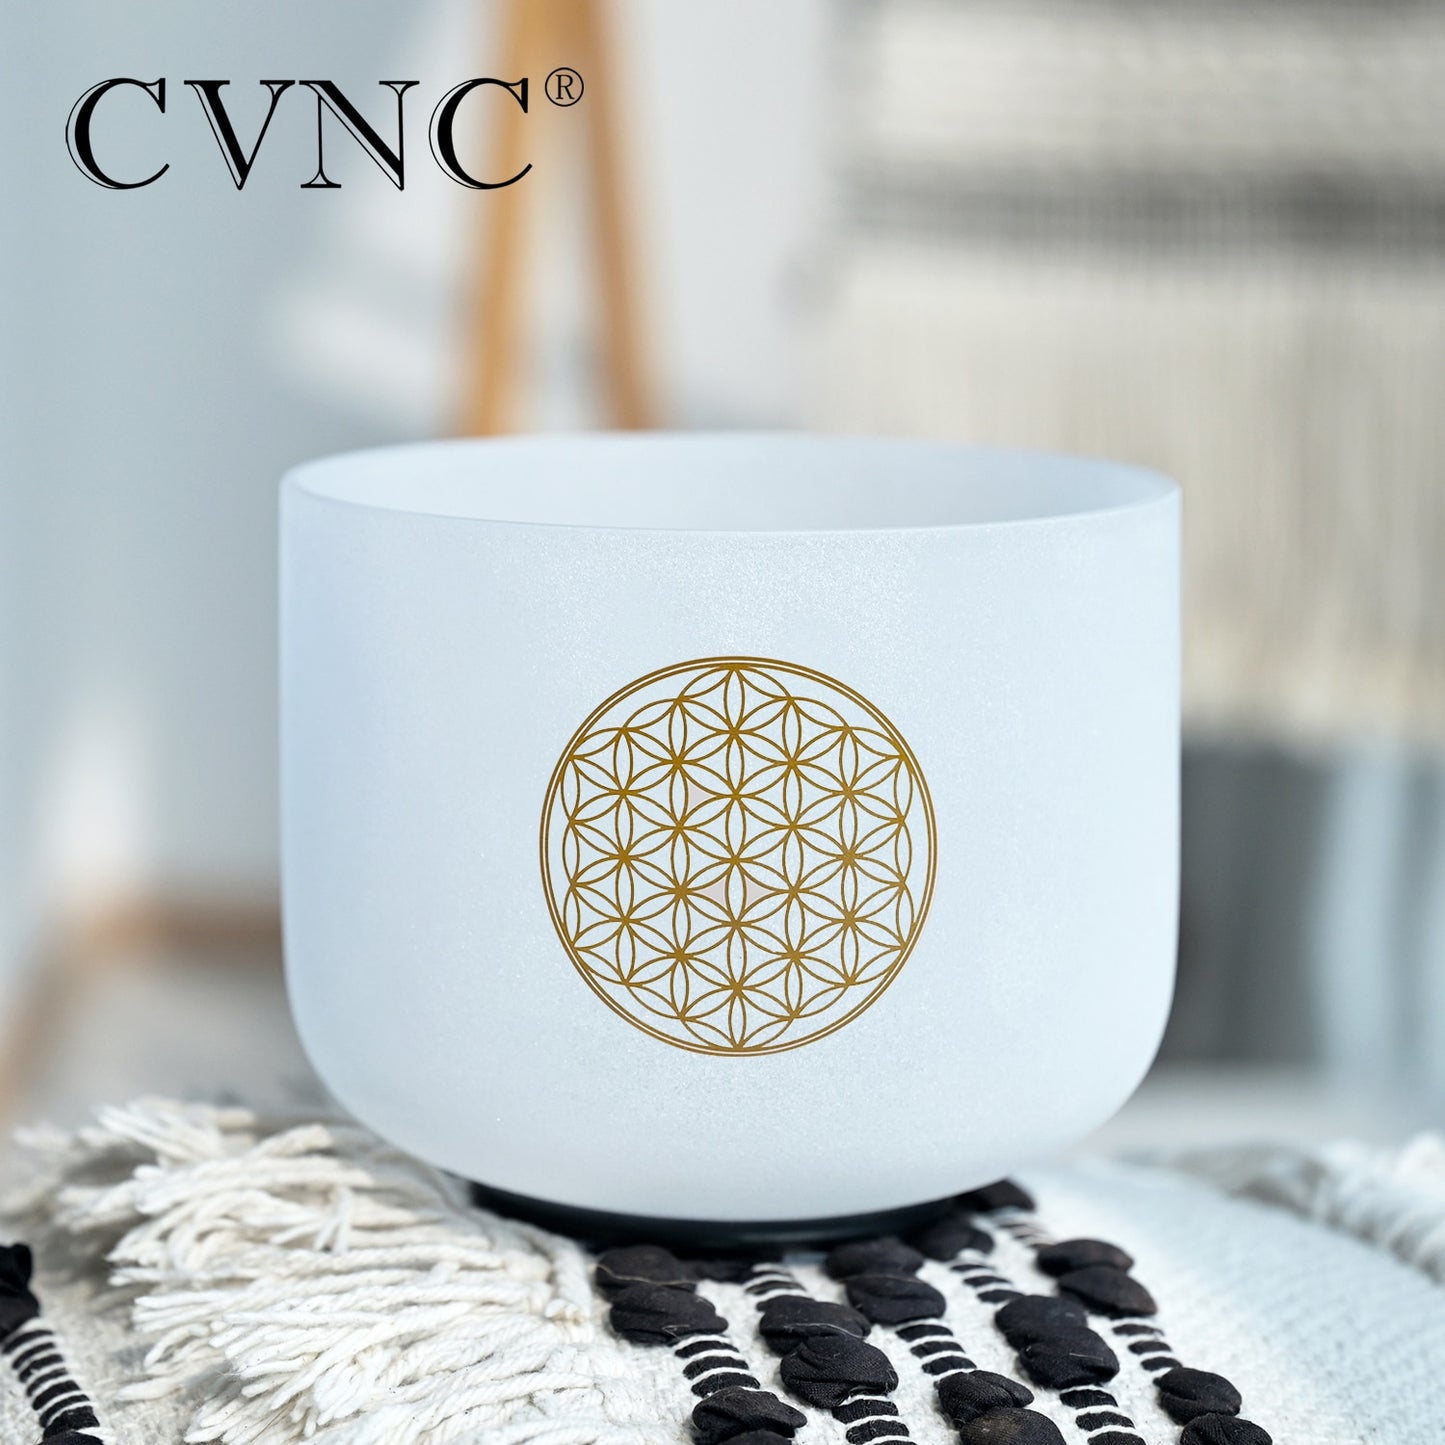 528Hz 8 Inch Frosted Quartz Crystal Singing Bowl C Note with Flower of Life Design Includes Case and Mallet  by CVNC